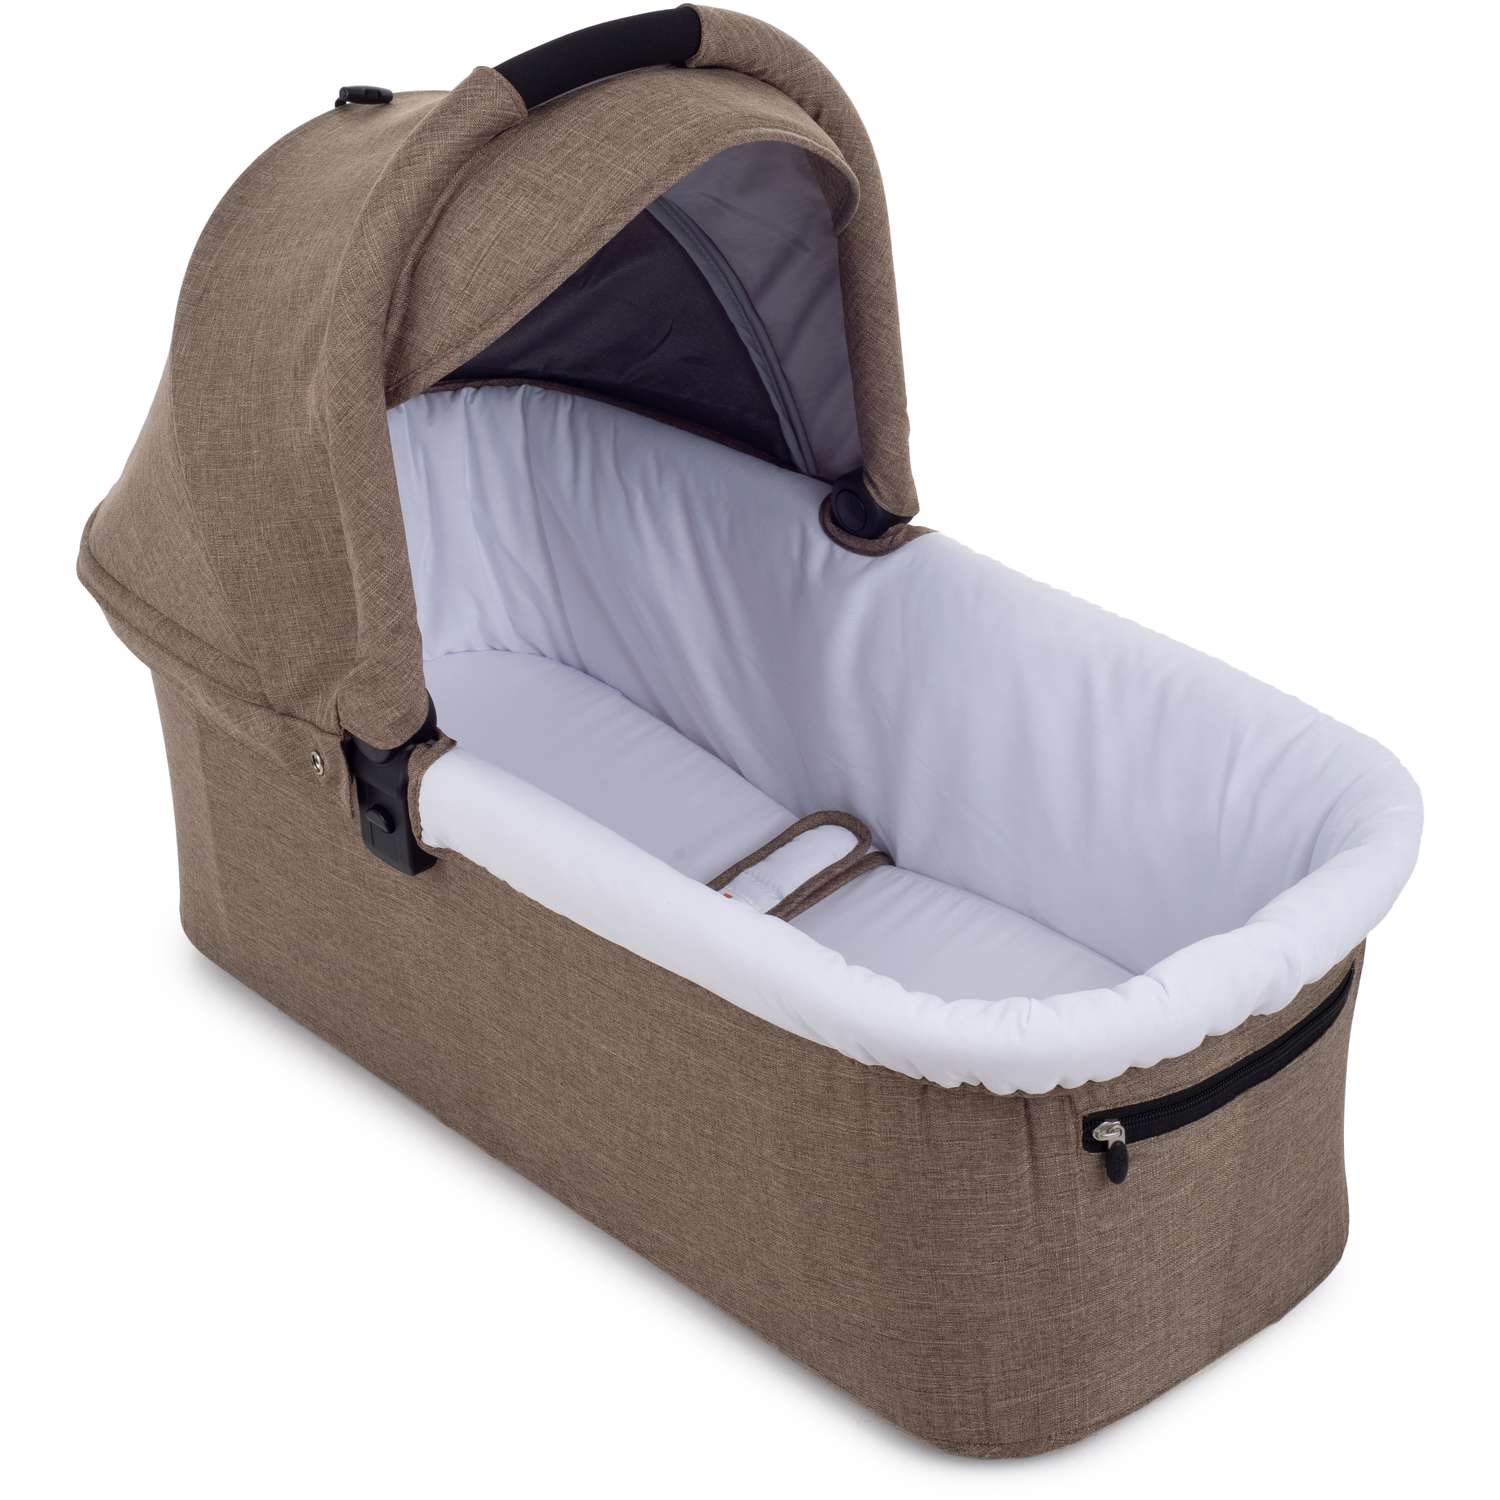 Люлька External Bassinet Valco Baby Snap Trend Snap 4 Trend Snap 4 Ultra Trend / Cappuccino 0070 - фото 2